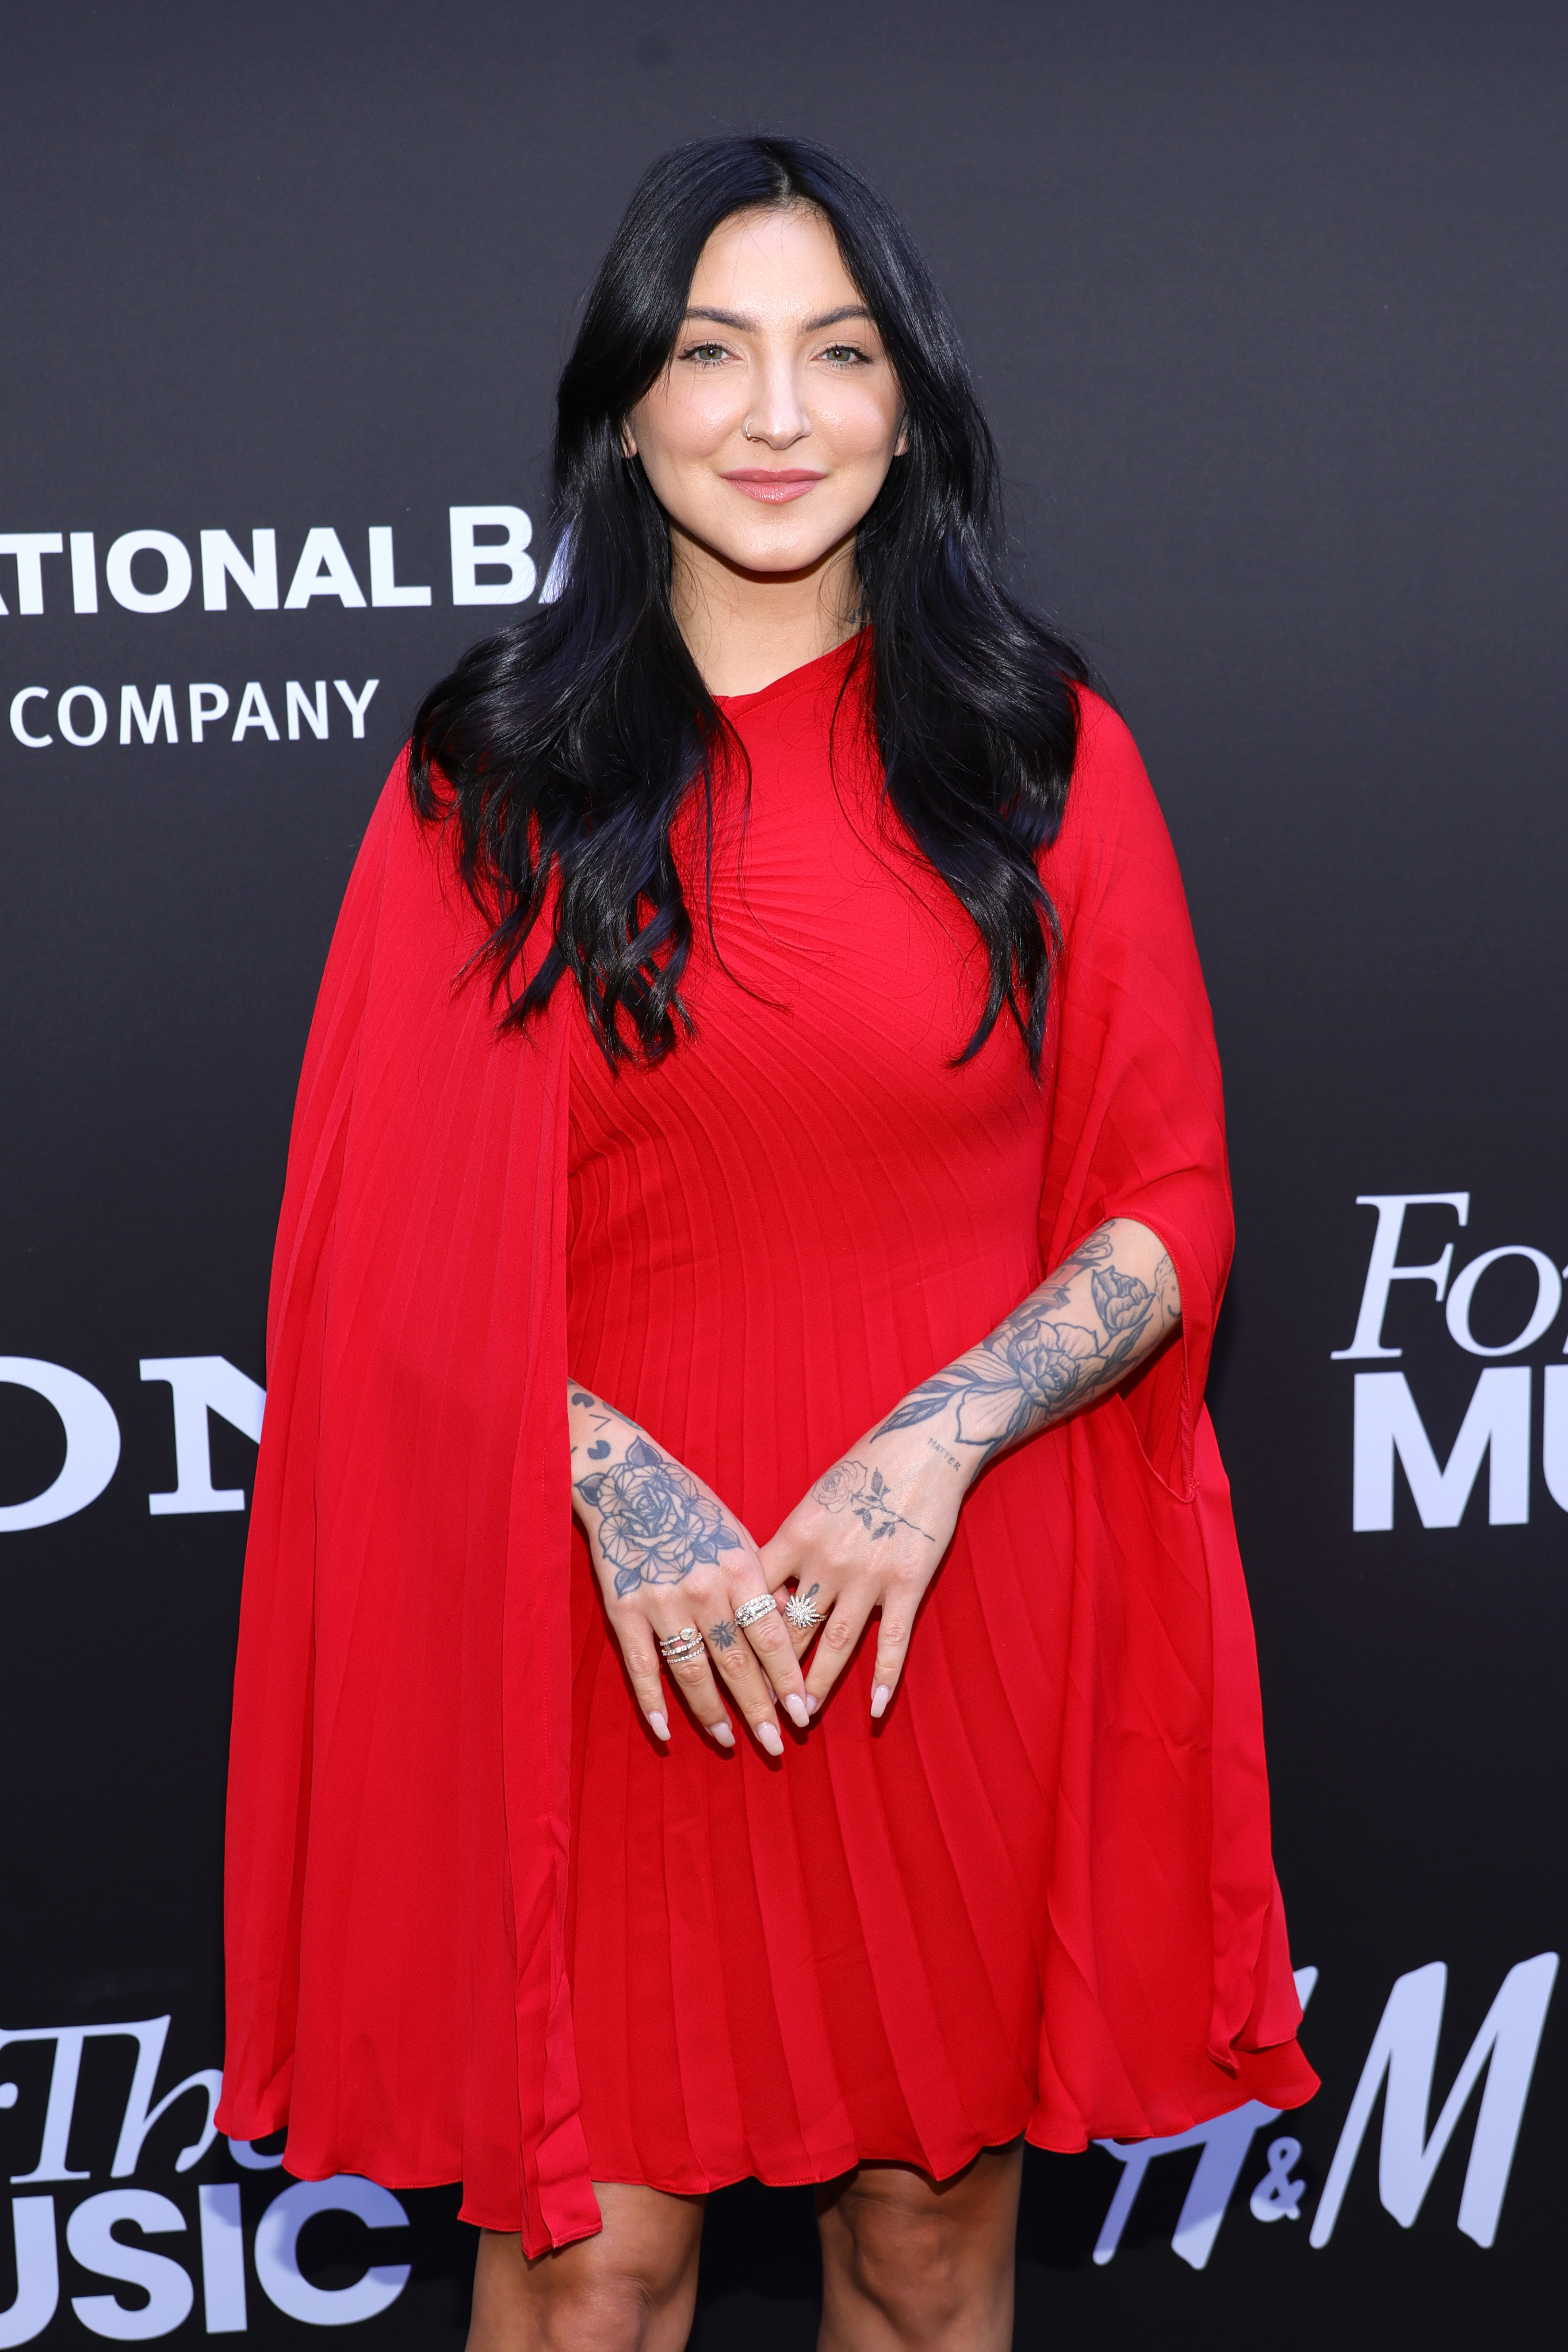 Julia in a red cape-style dress posing with hands together, showing sleeve tattoos